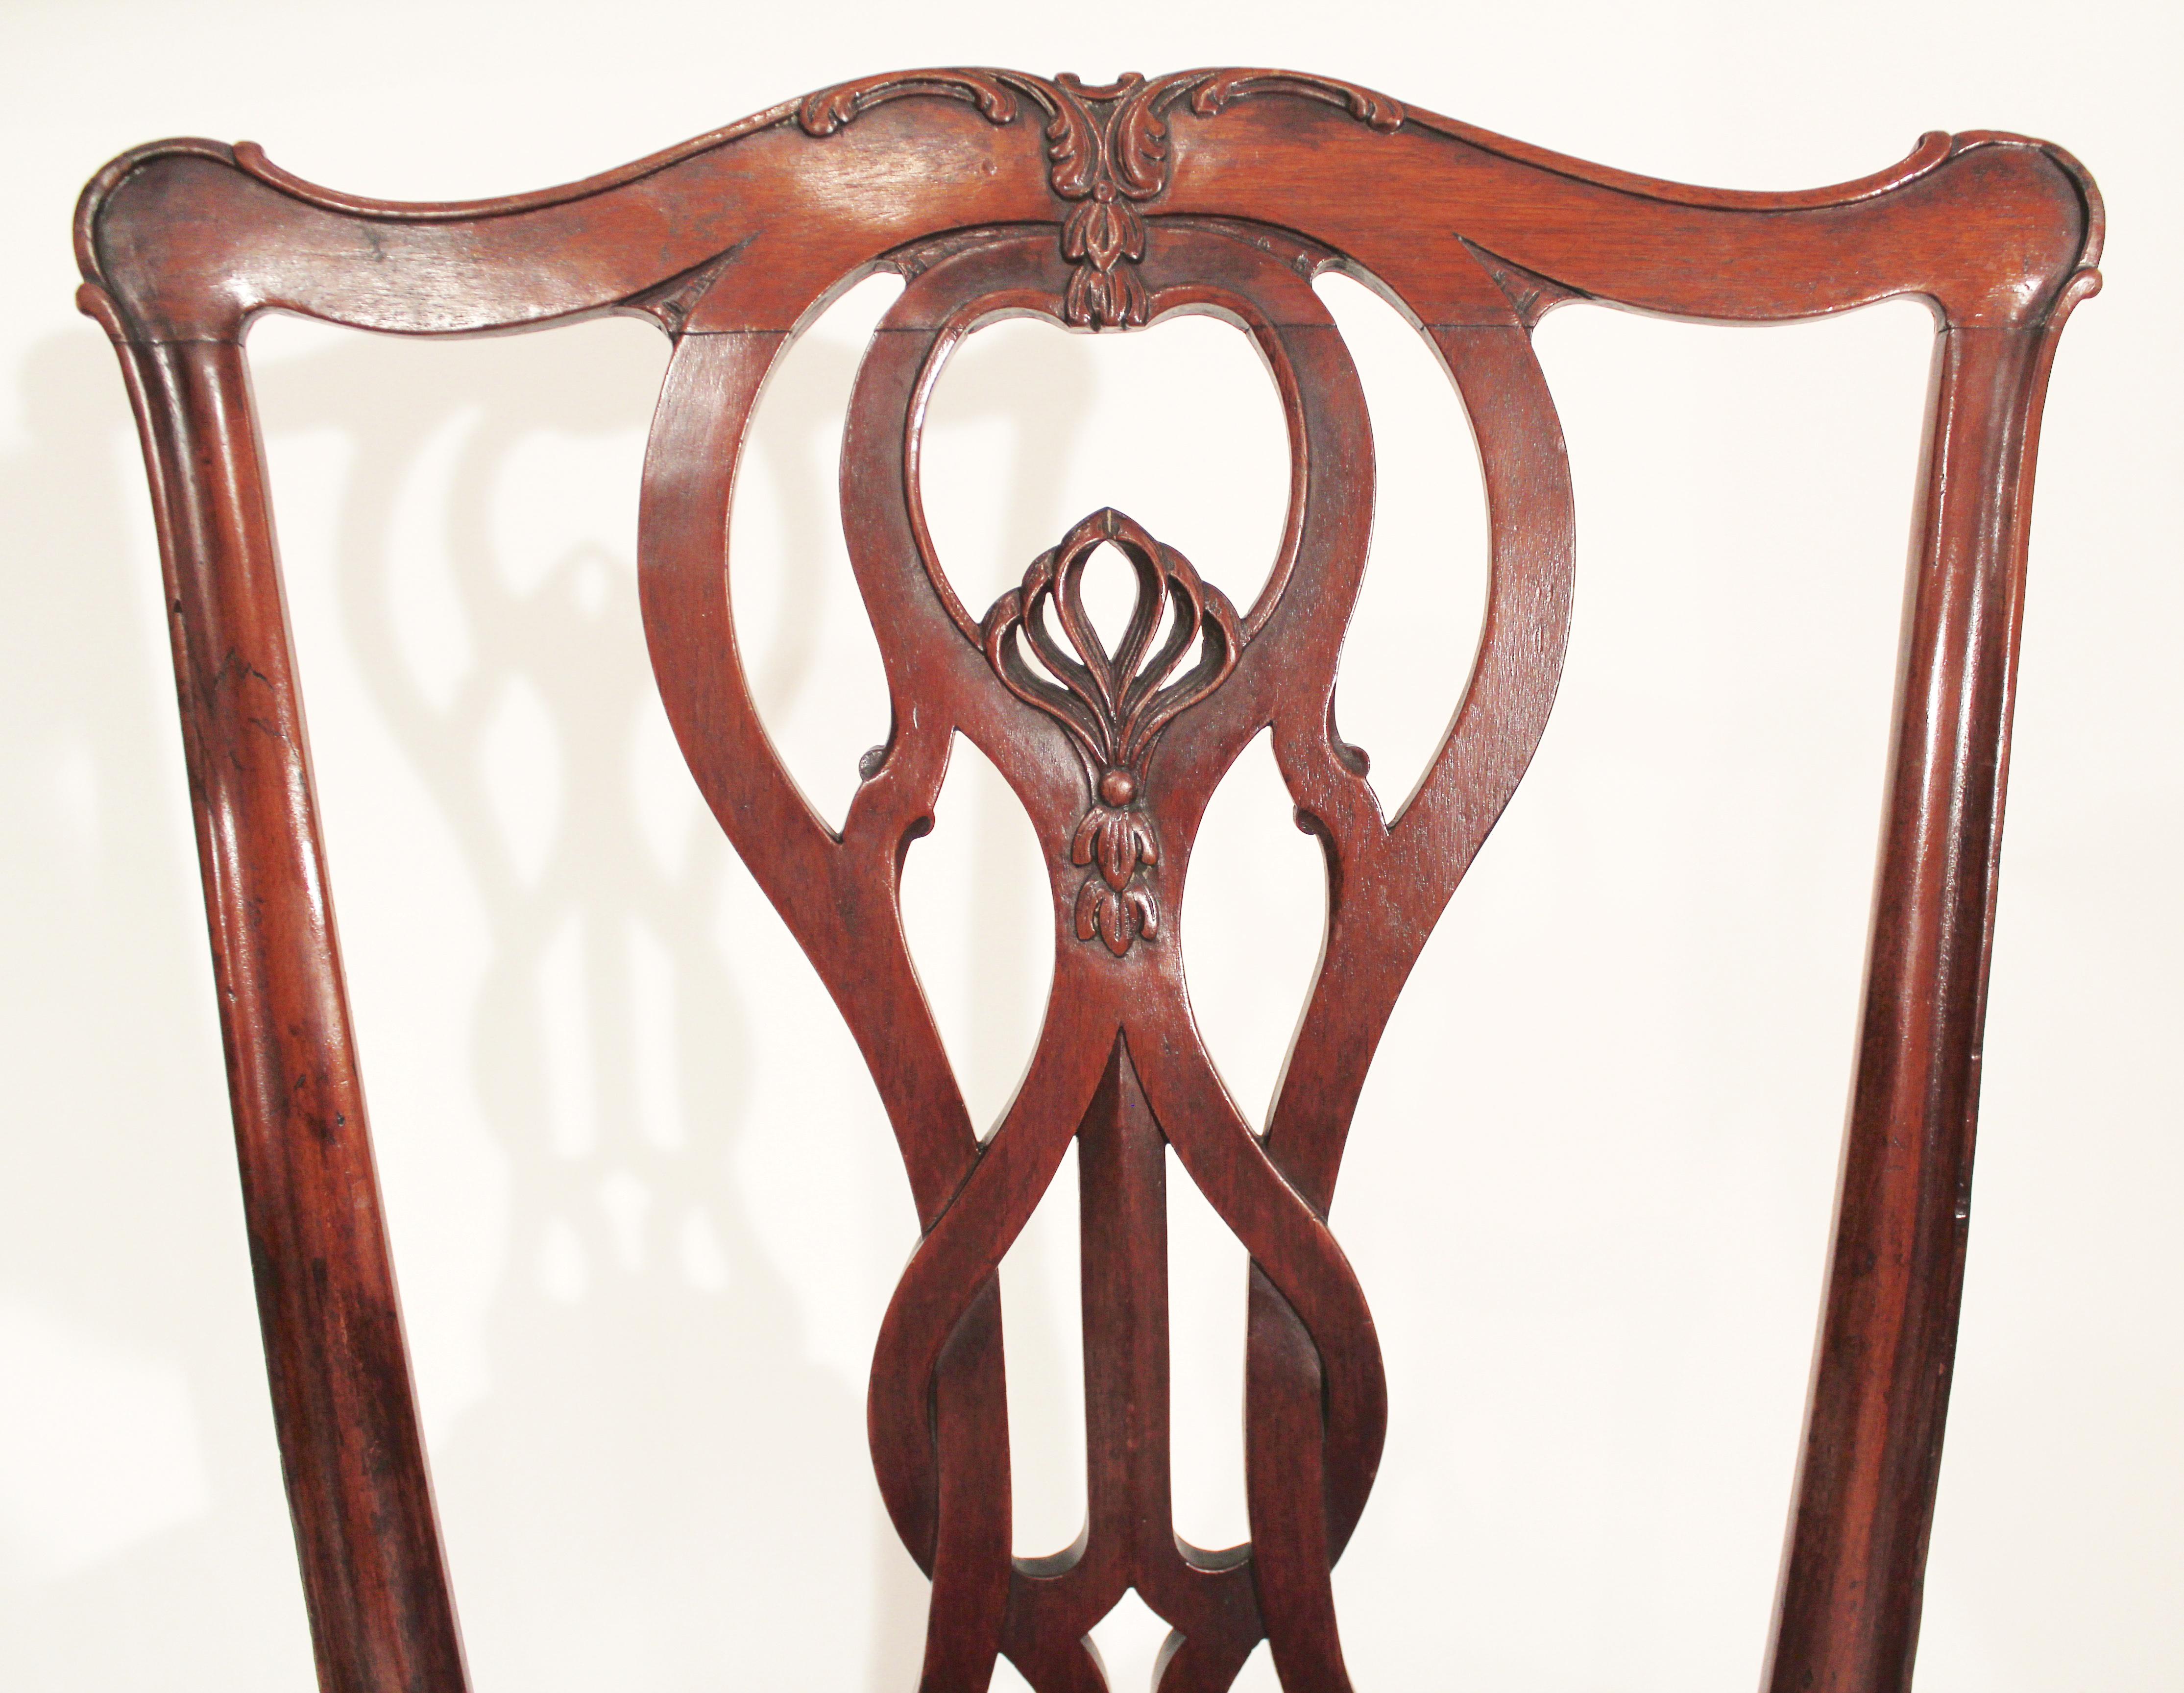 Pair of Baltimore mahogany Chippendale side chairs with wonderfully carved crest rail and pierced Gothic splat with molded stiles cabriole legs terminating in claw and ball feet.